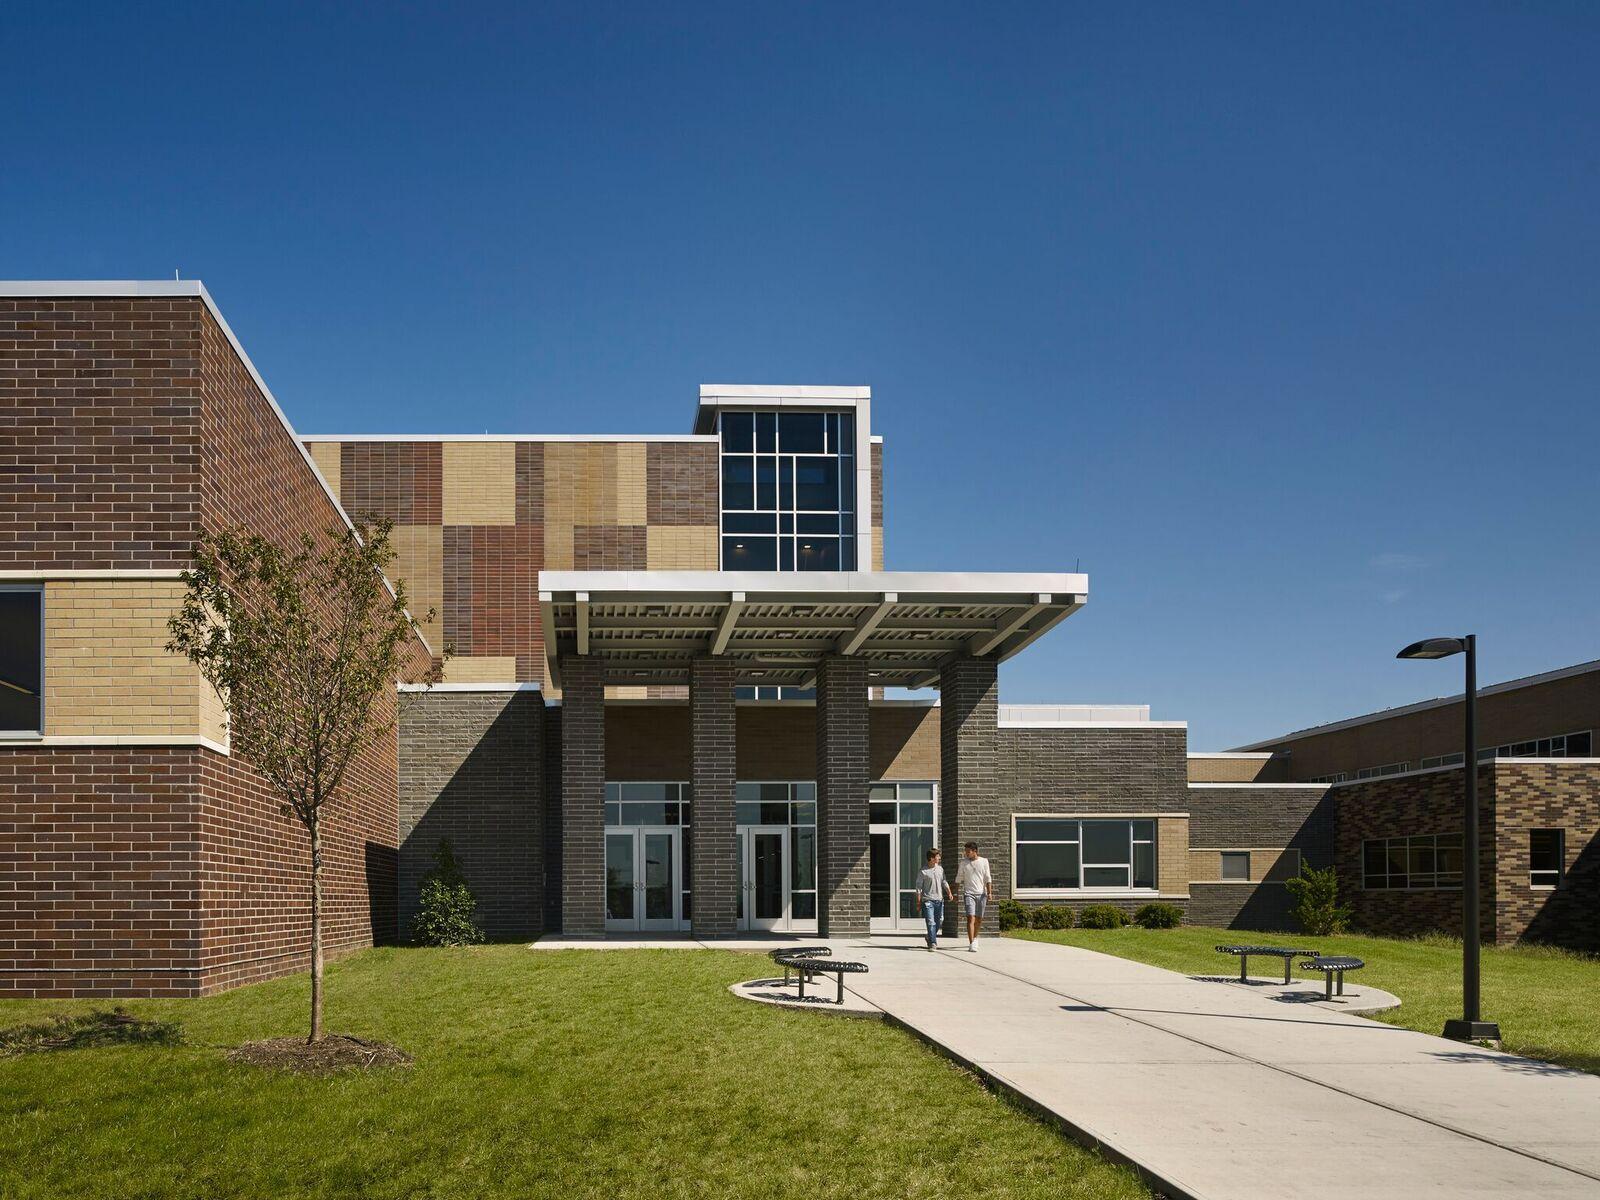 Image of the bricked exterior and green lawn of Phillipsburg High School